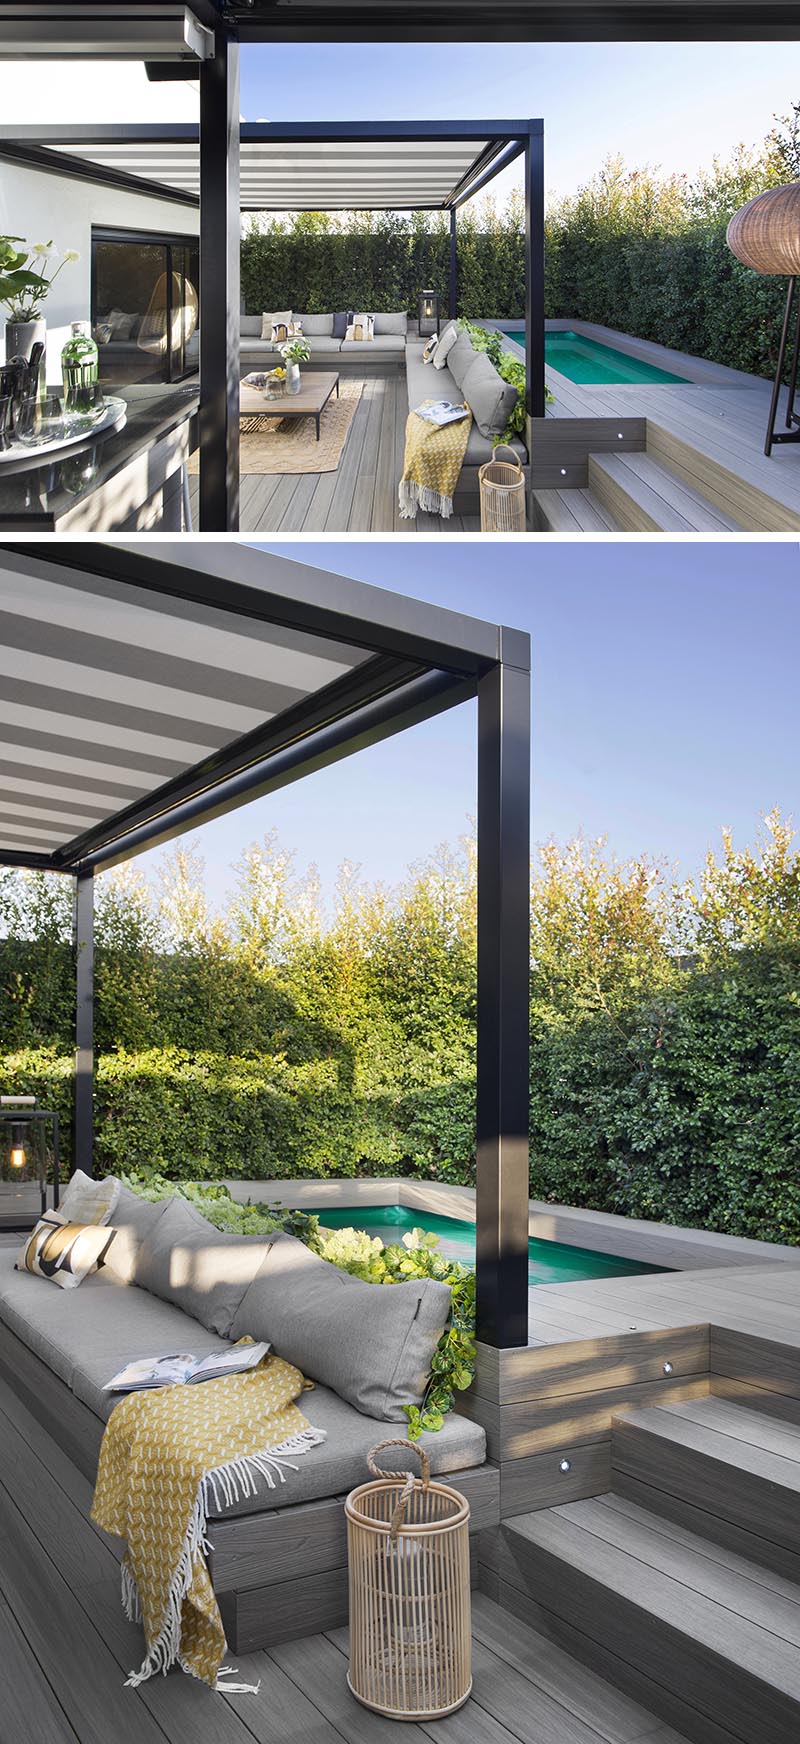 Almost hidden from view on this terrace is the small swimming pool, that's located behind the lounge. It's raised up so that when someone is in the pool, they are at the same height as the people sitting on the lounge. #Terrace #SwimmingPool #OutdoorLounge